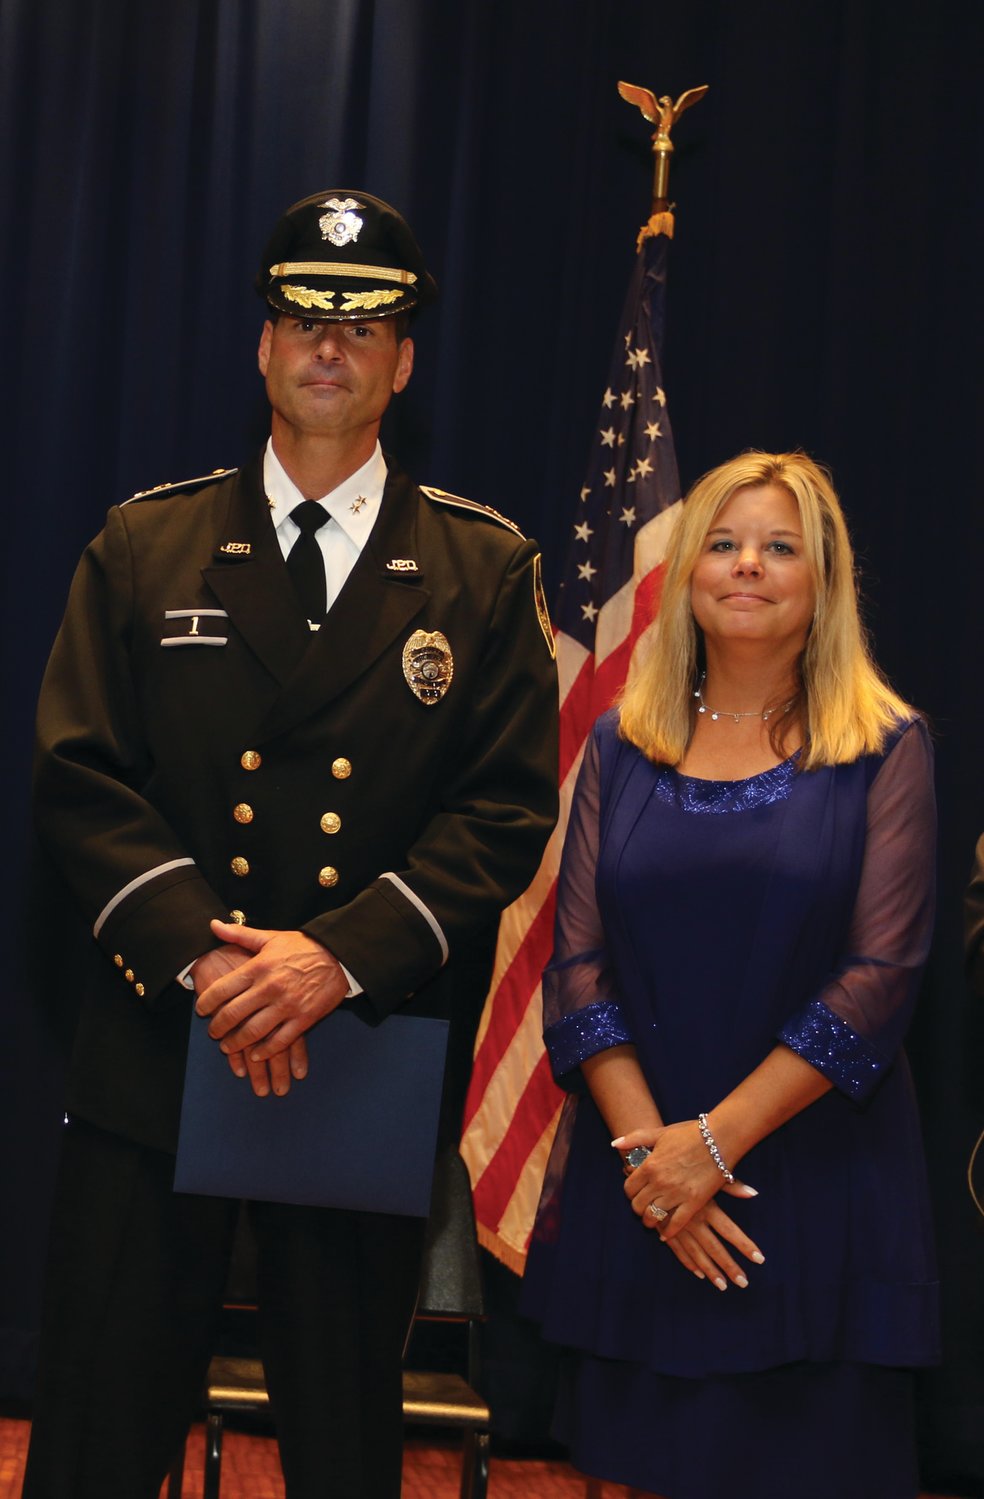 SWORN IN: On Aug. 31, 2020, former Johnston Mayor Joseph Polisena swore Razza in as the department’s eighth chief, while his wife Mandi pinned on his badge. He posed for a photo with his wife after the ceremony.